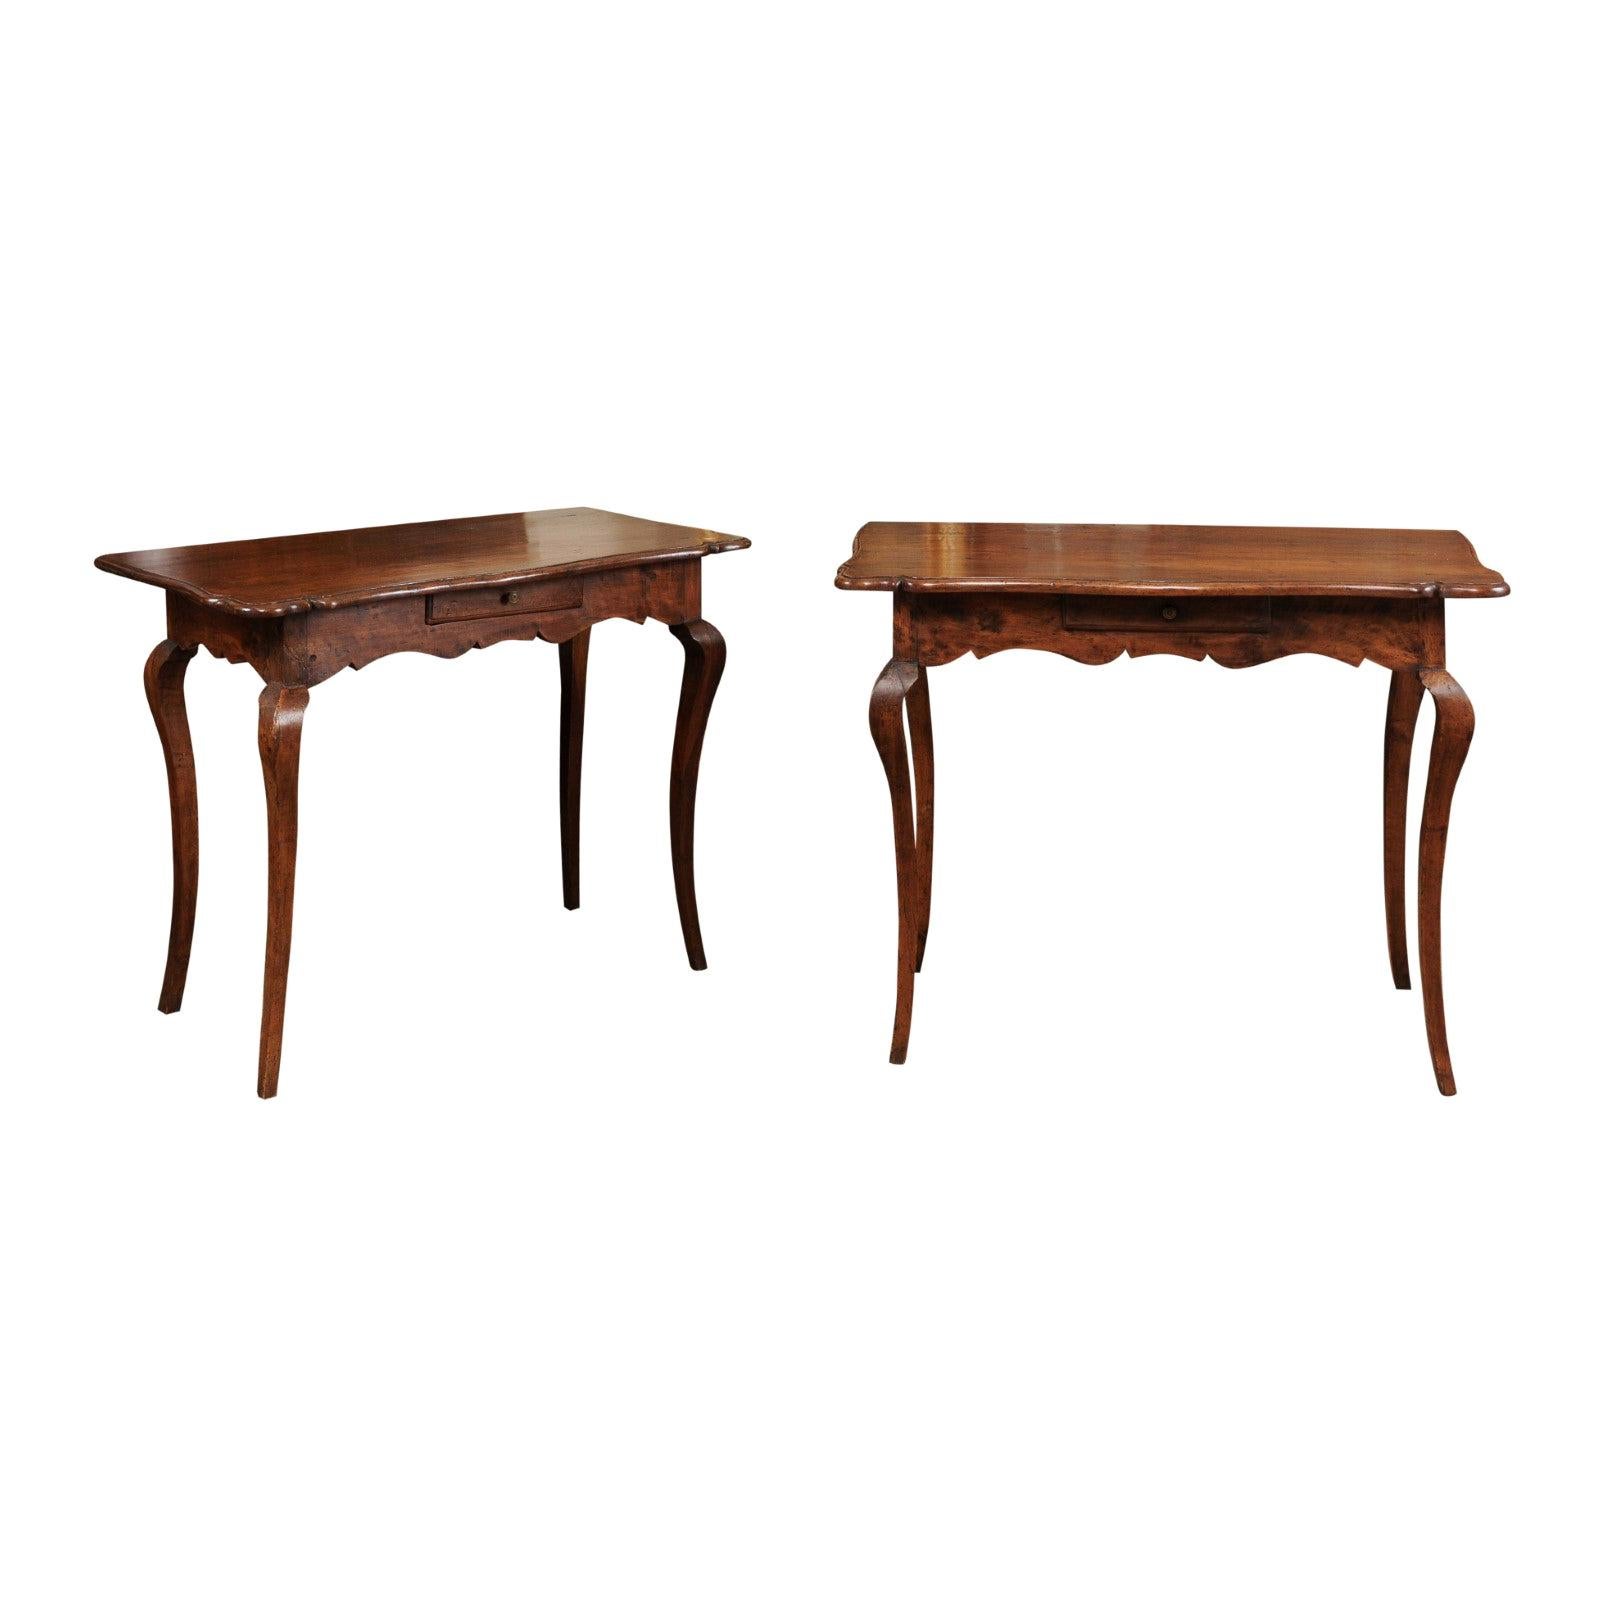 Pair of Rococo Period Walnut Console Tables, Mid-18th Century